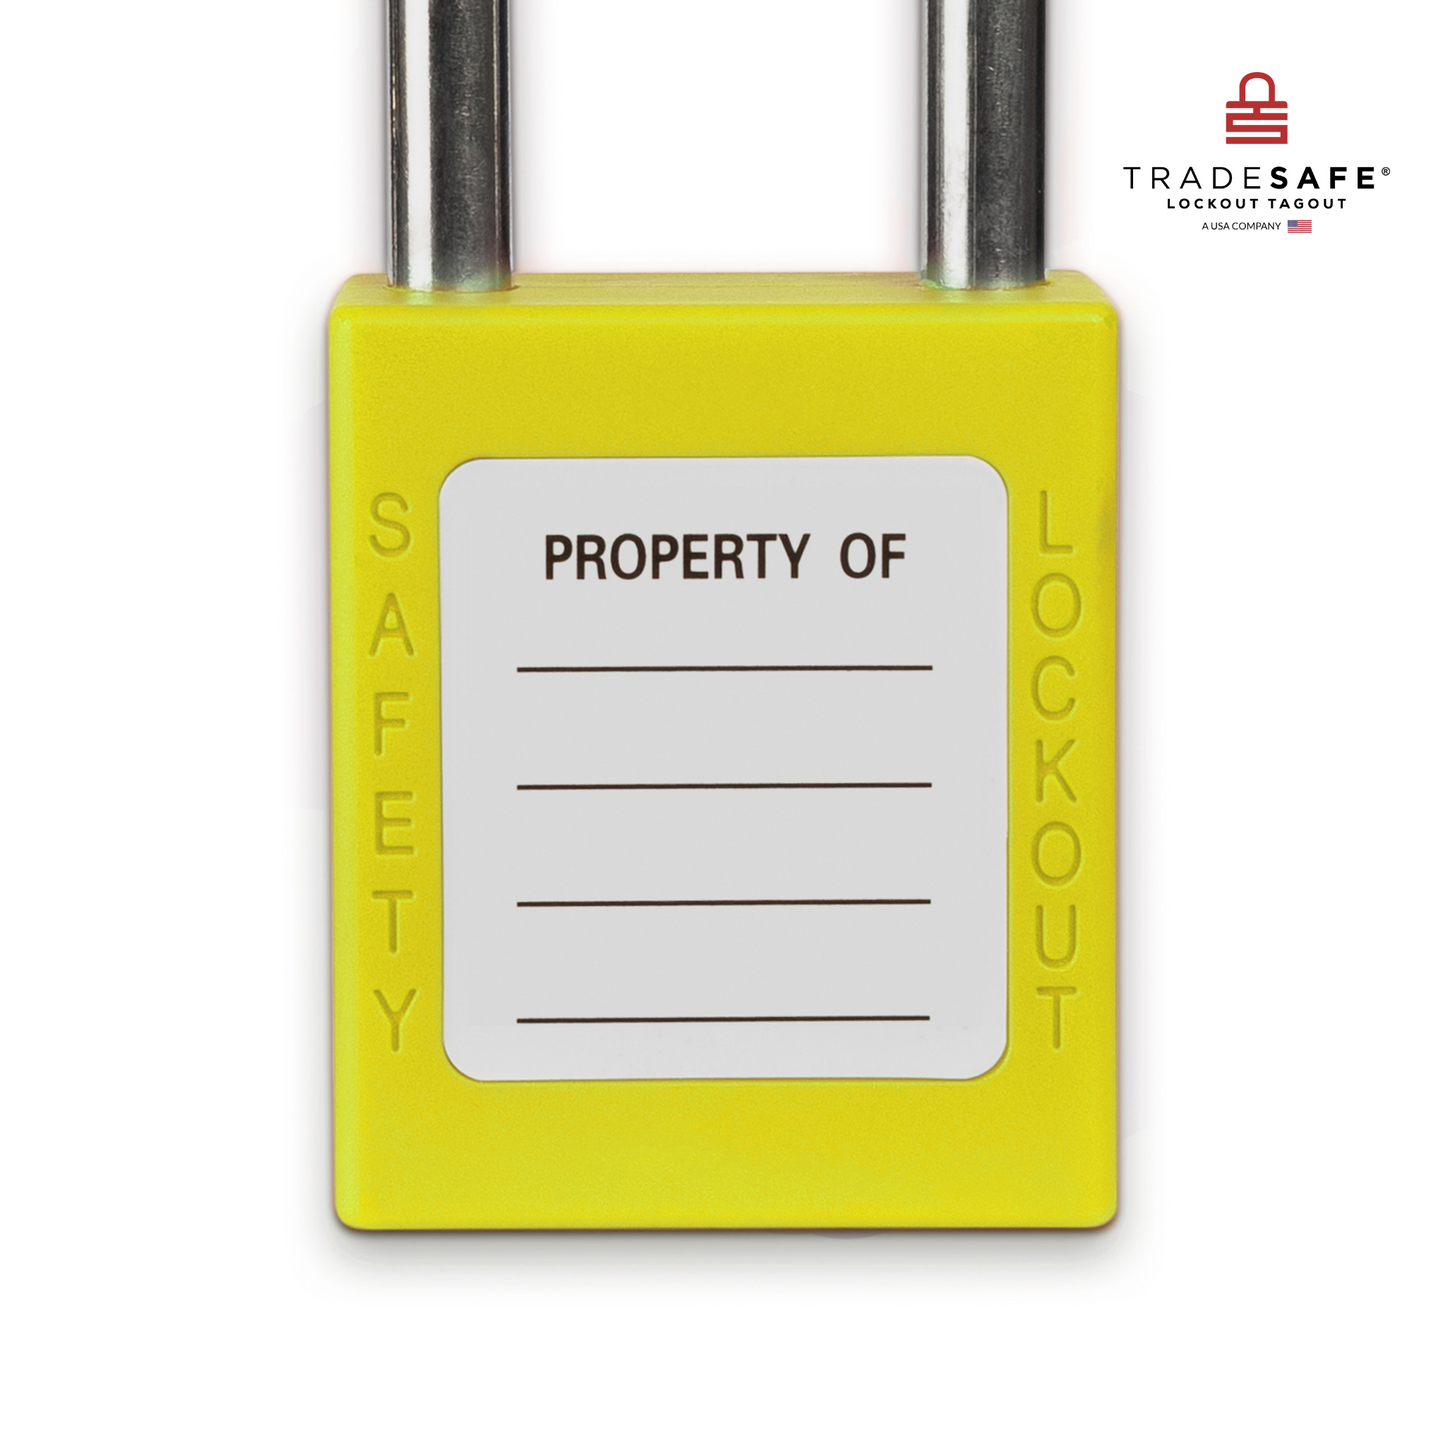 close-up view of the writable area at the back of the yellow loto padlock's body 